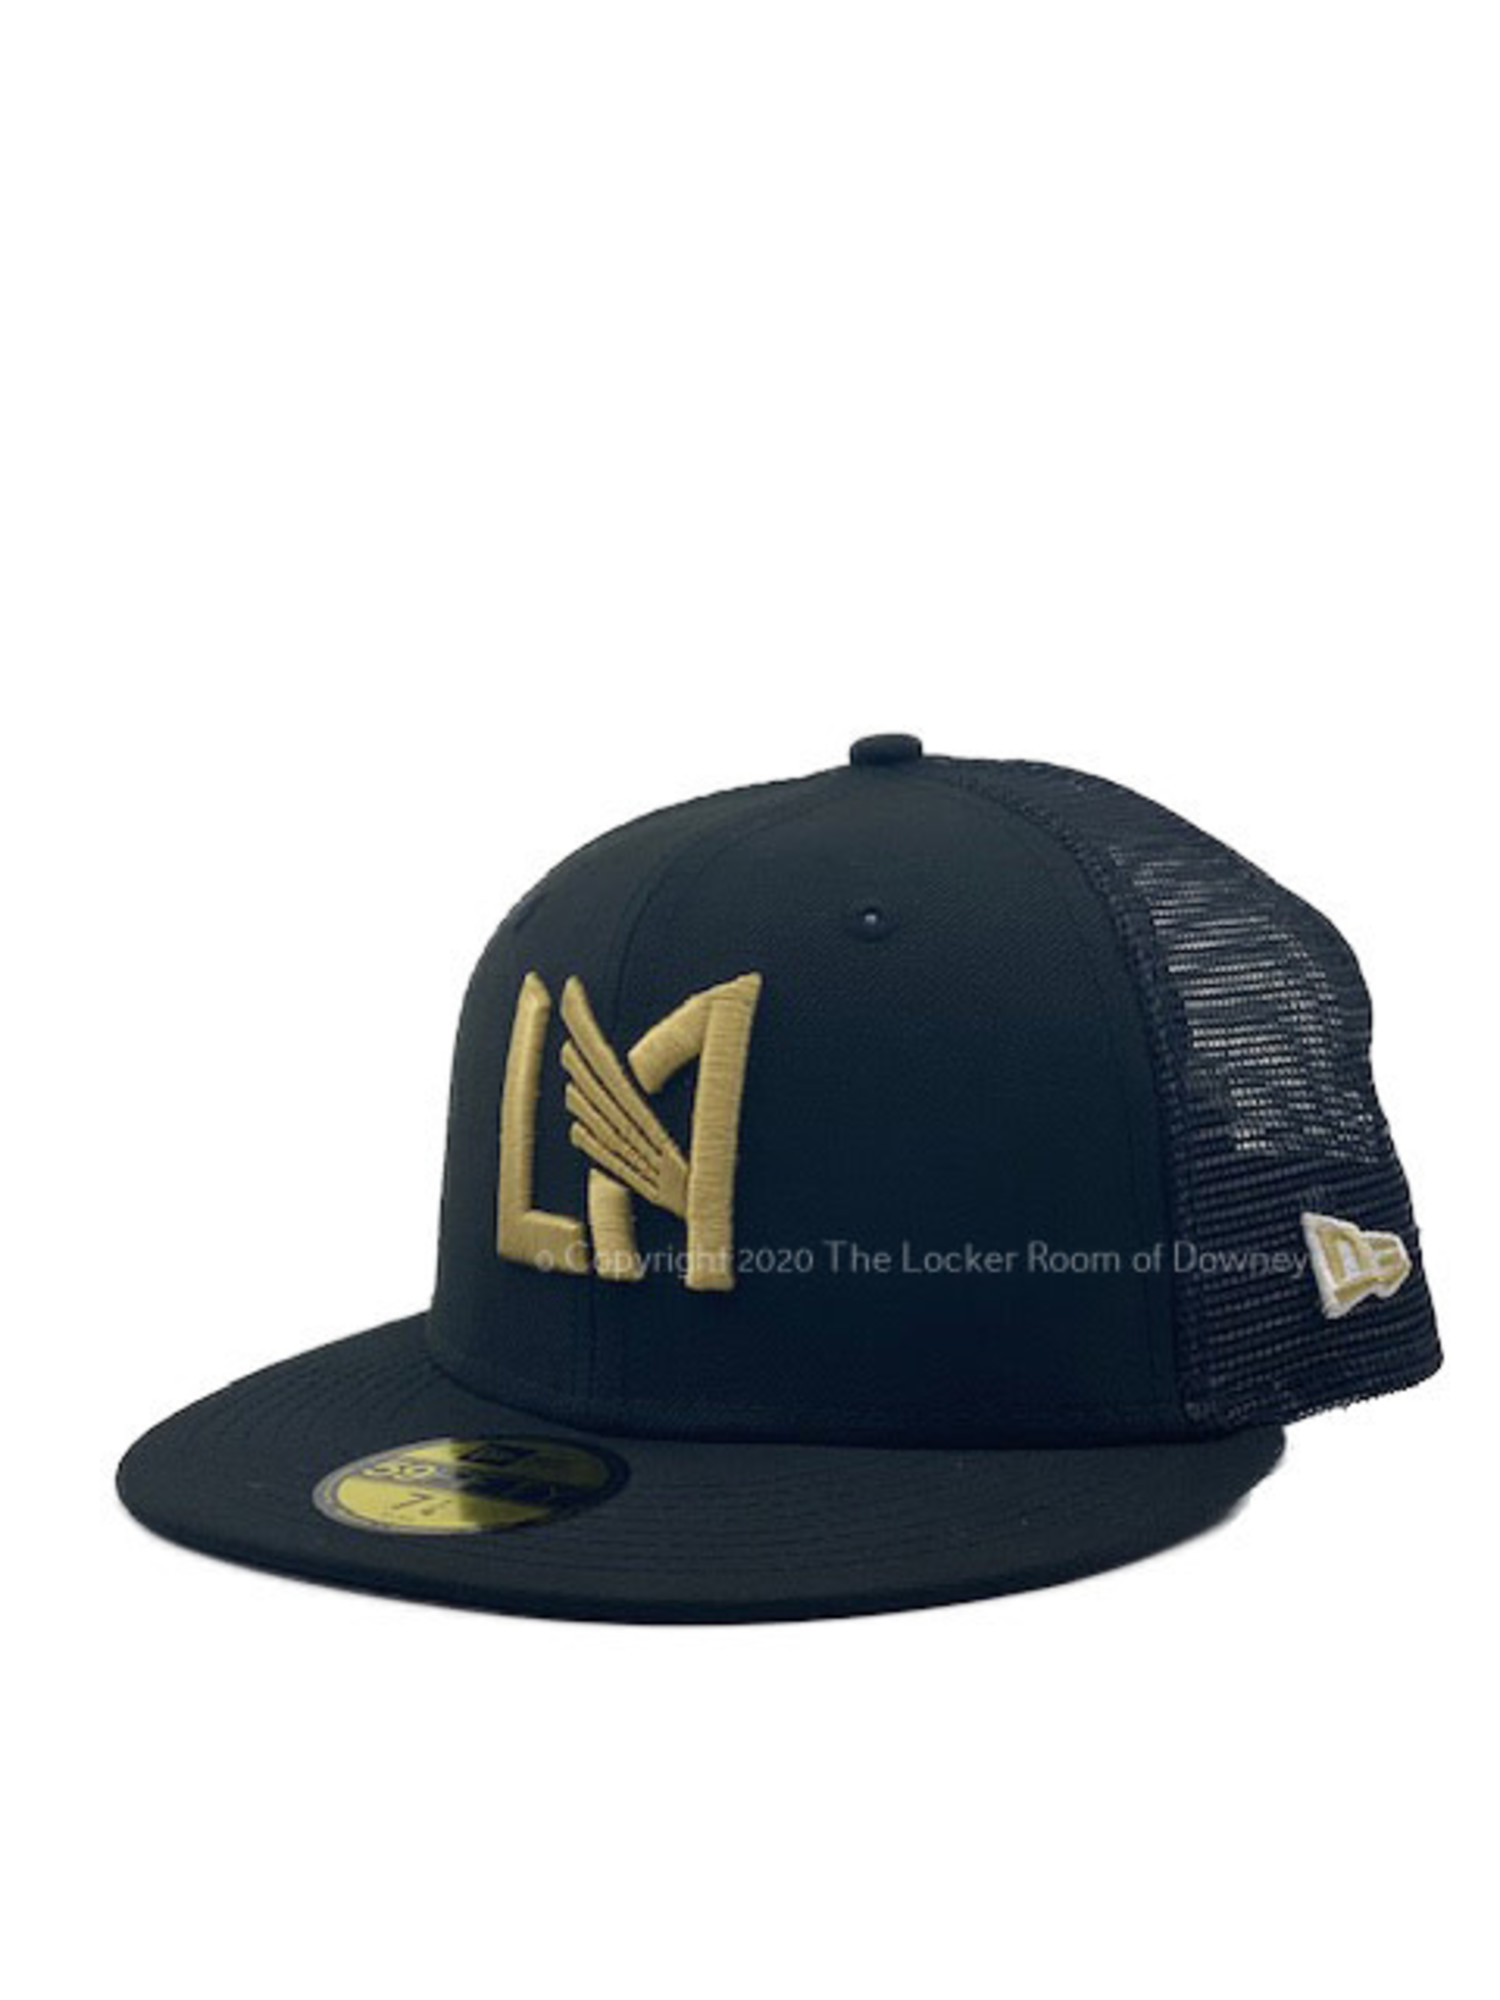 LAFC New Era Primary Logo Low Profile 59FIFTY Fitted Hat - Black